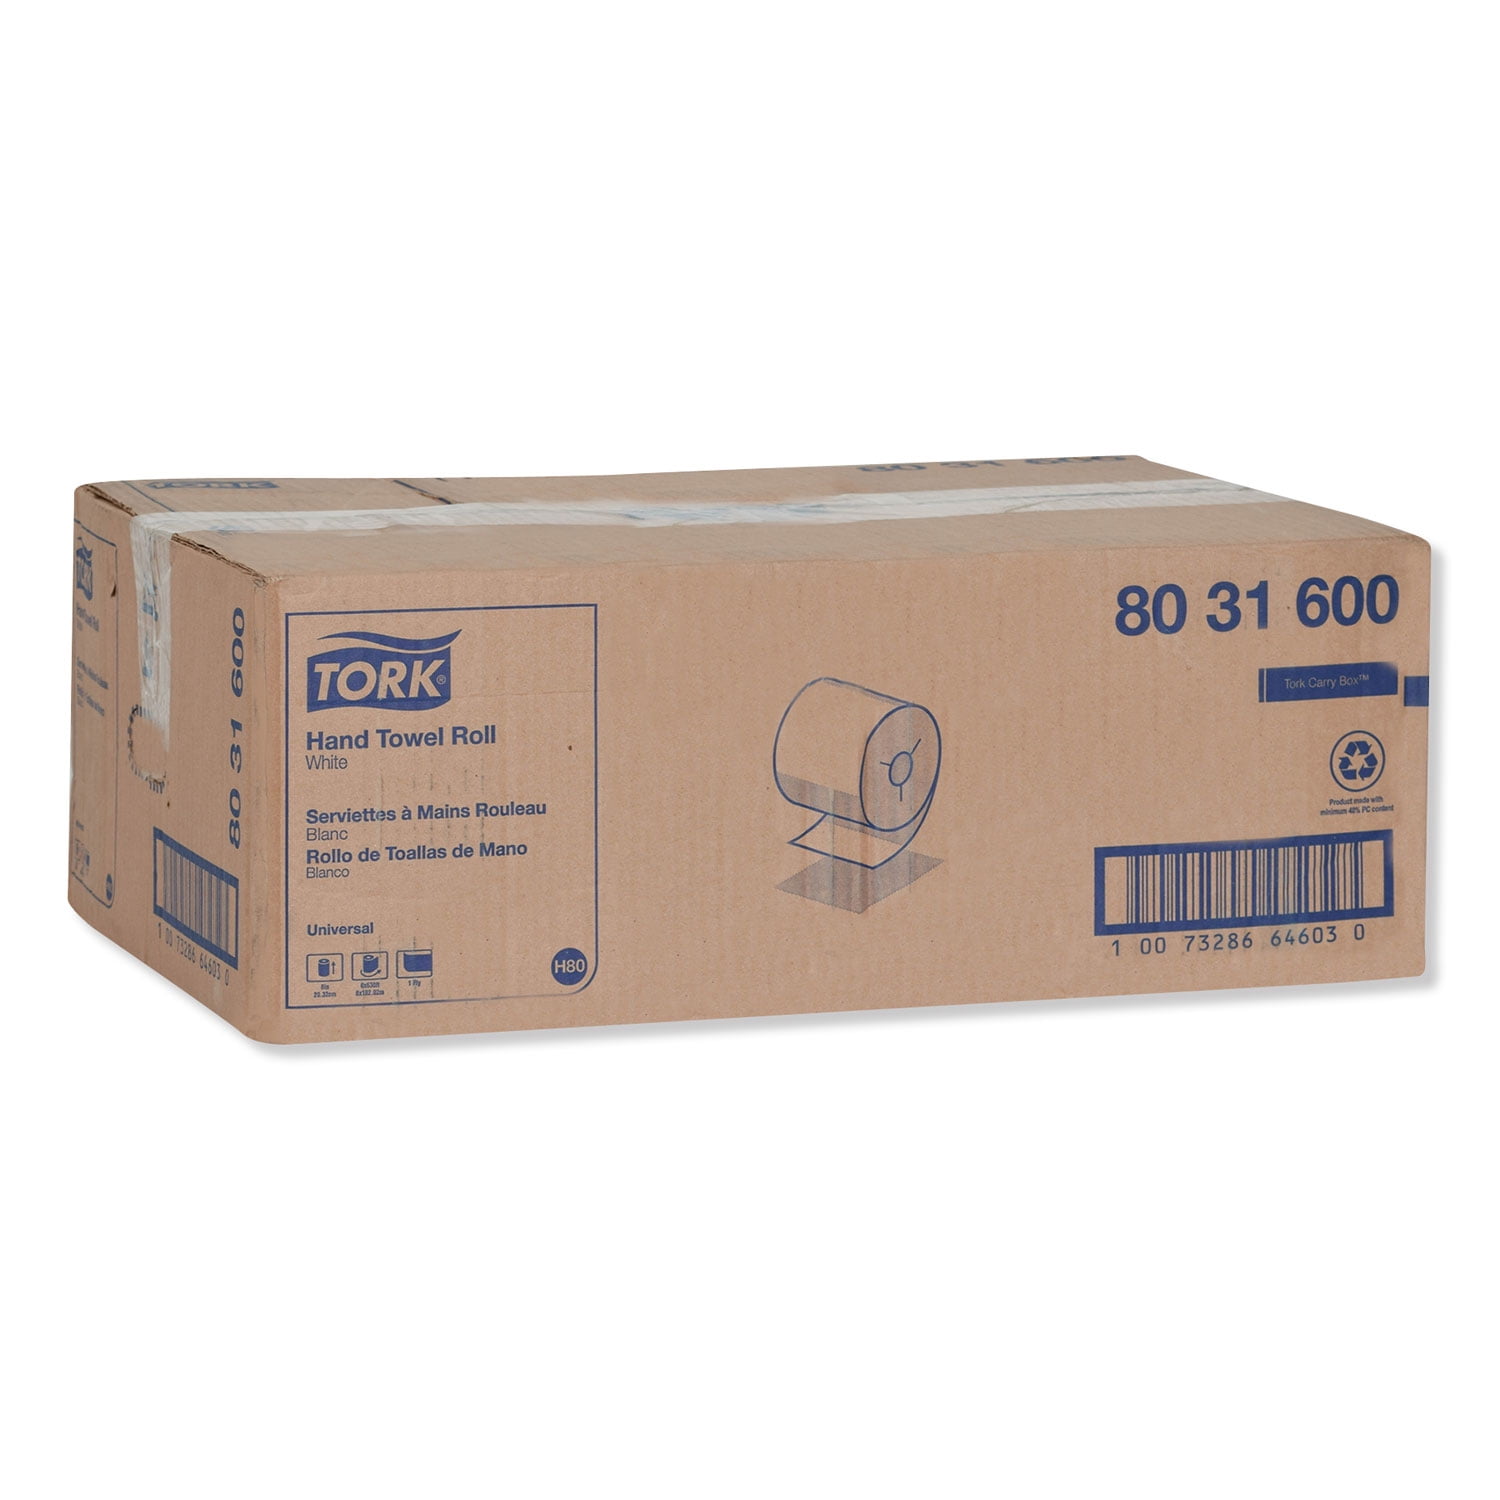 Details about   Tork TOWELHRDRL8-Inch 6/CTWH 8031600 